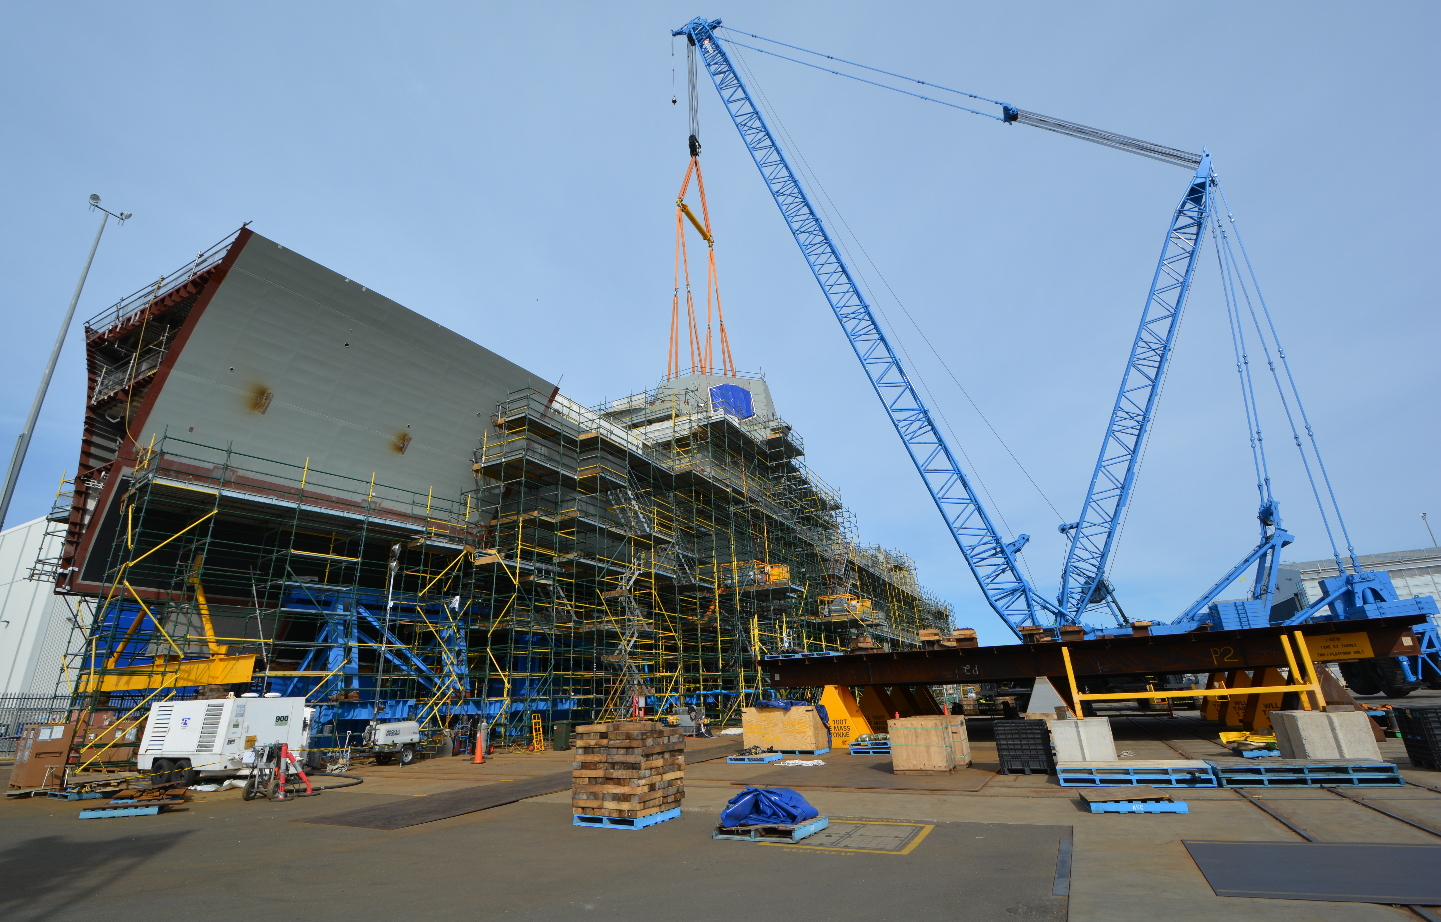 A crane lowers the Aegis tower onto the HOBART's superstructure at Adelaide on Sept. 29. (Australian Ministry of Defence)